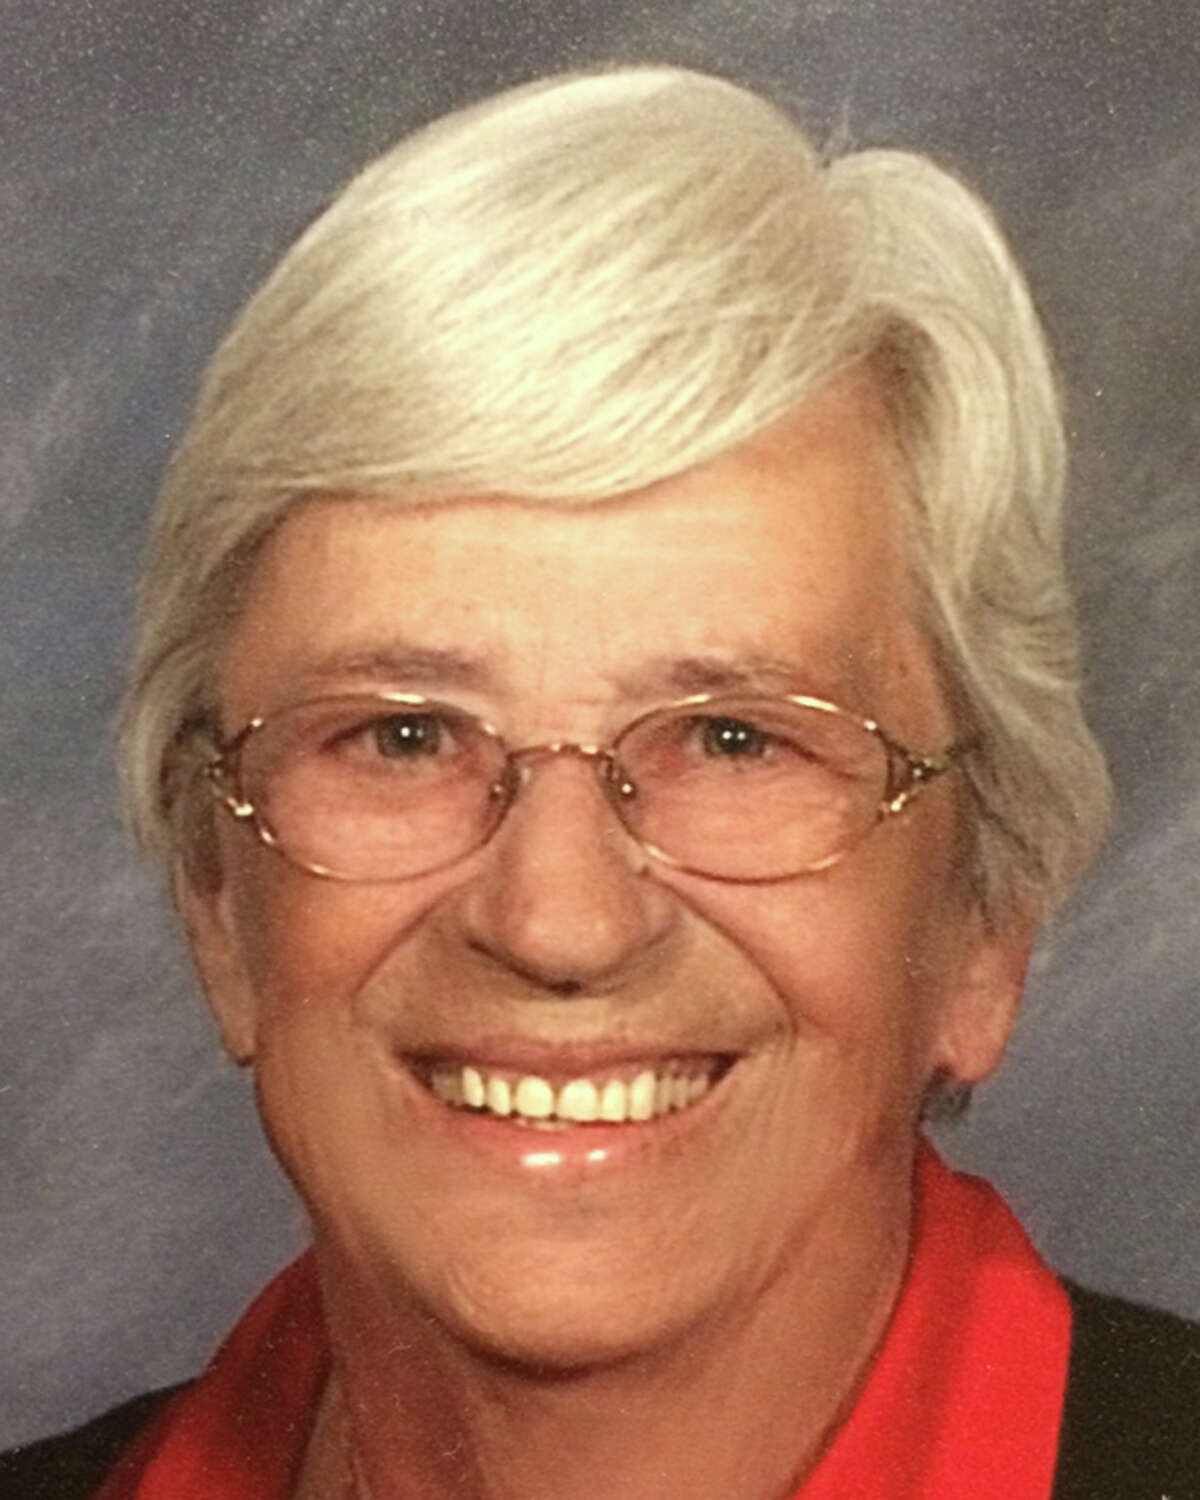 Jan WIlbur, leader of the The Metropolitan Organization, president of the Houston chapter of the League of Women Voters, and member of Champaigns for People has died.